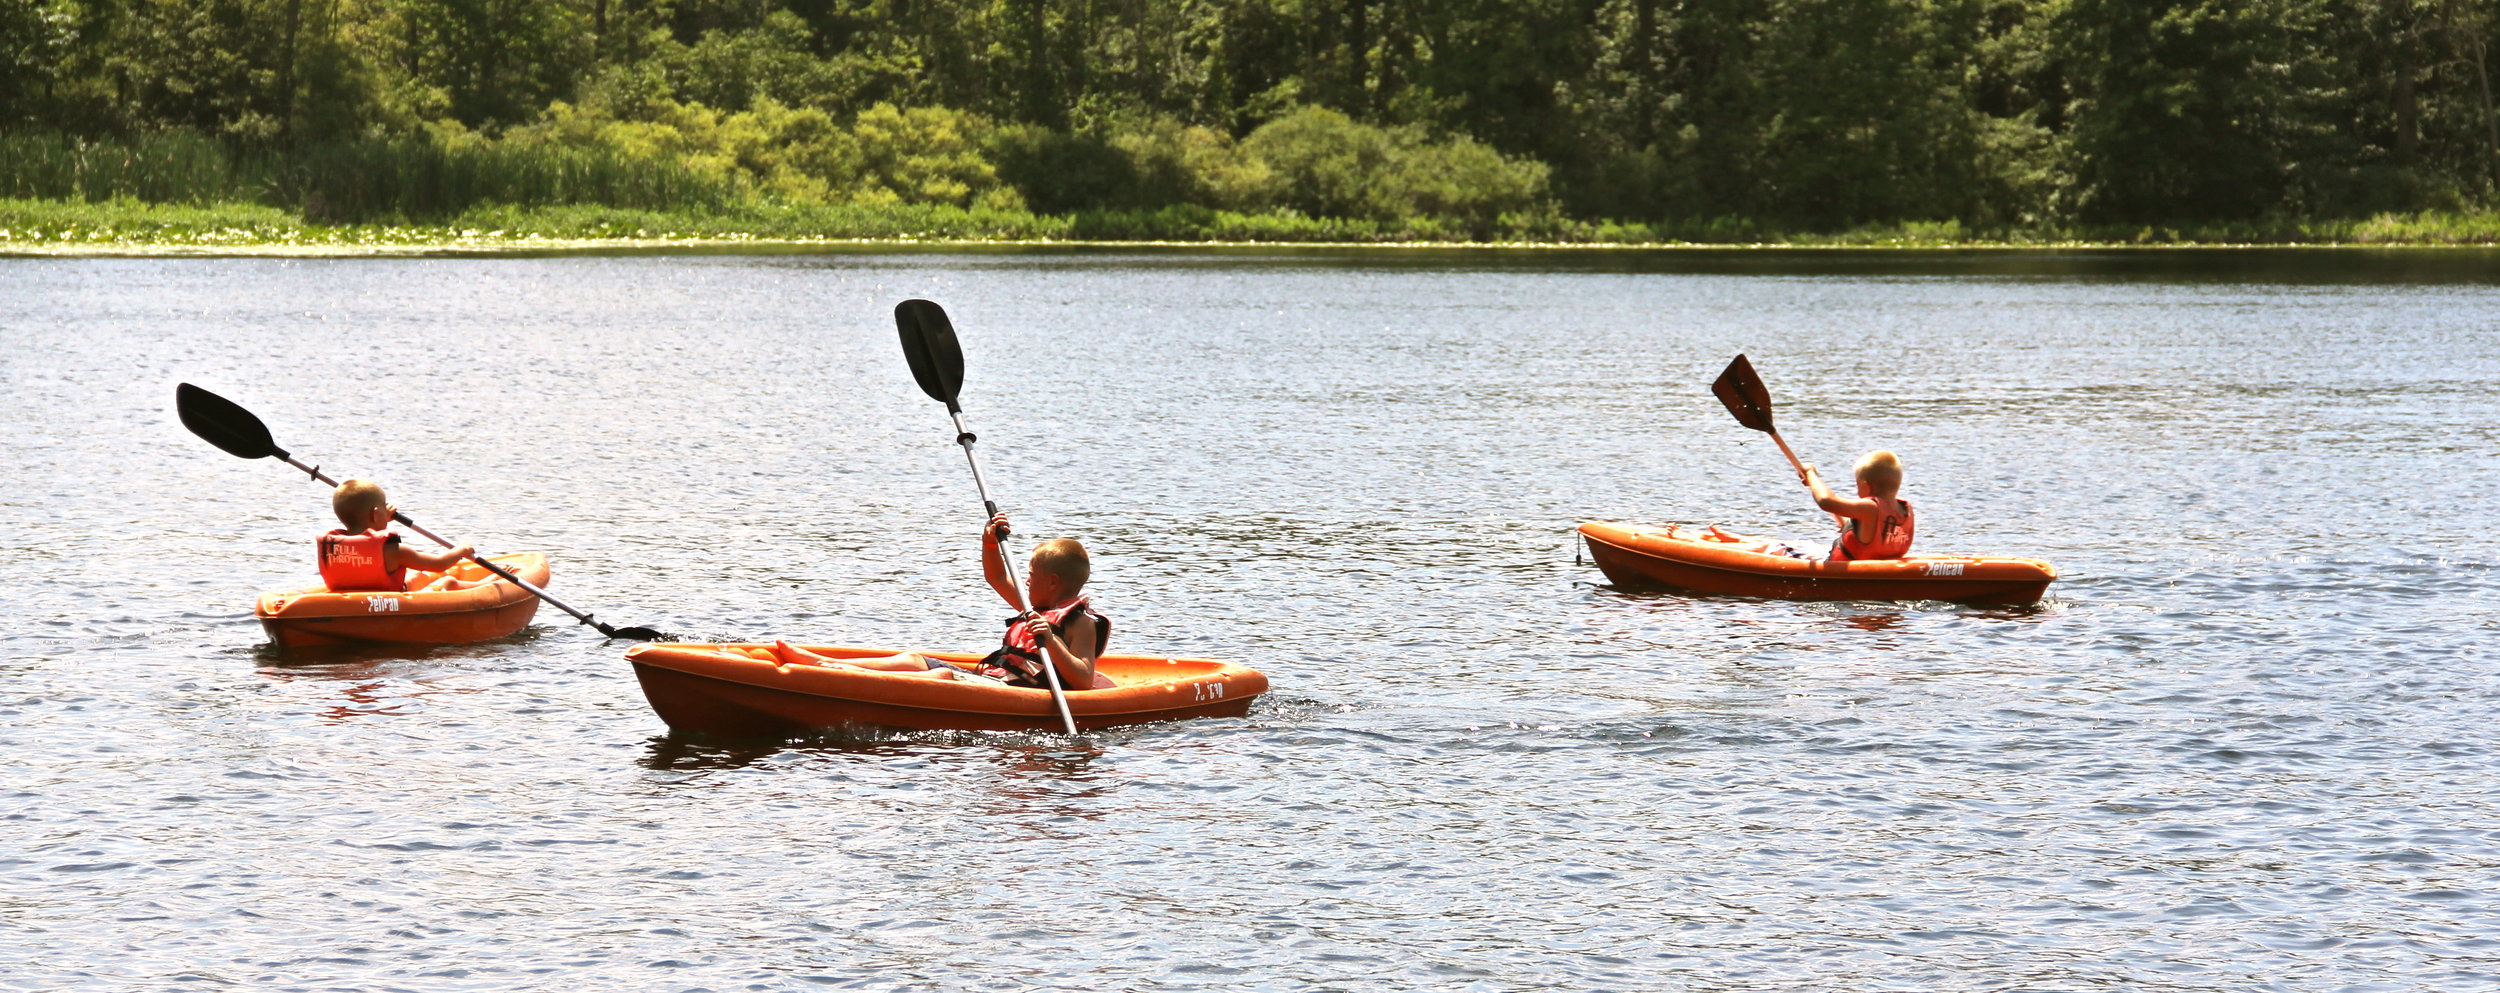  We have about 8 canoes, 6 paddleboats, 10 kayaks, and 5 stand-up paddle boards avialable for your group to use. 